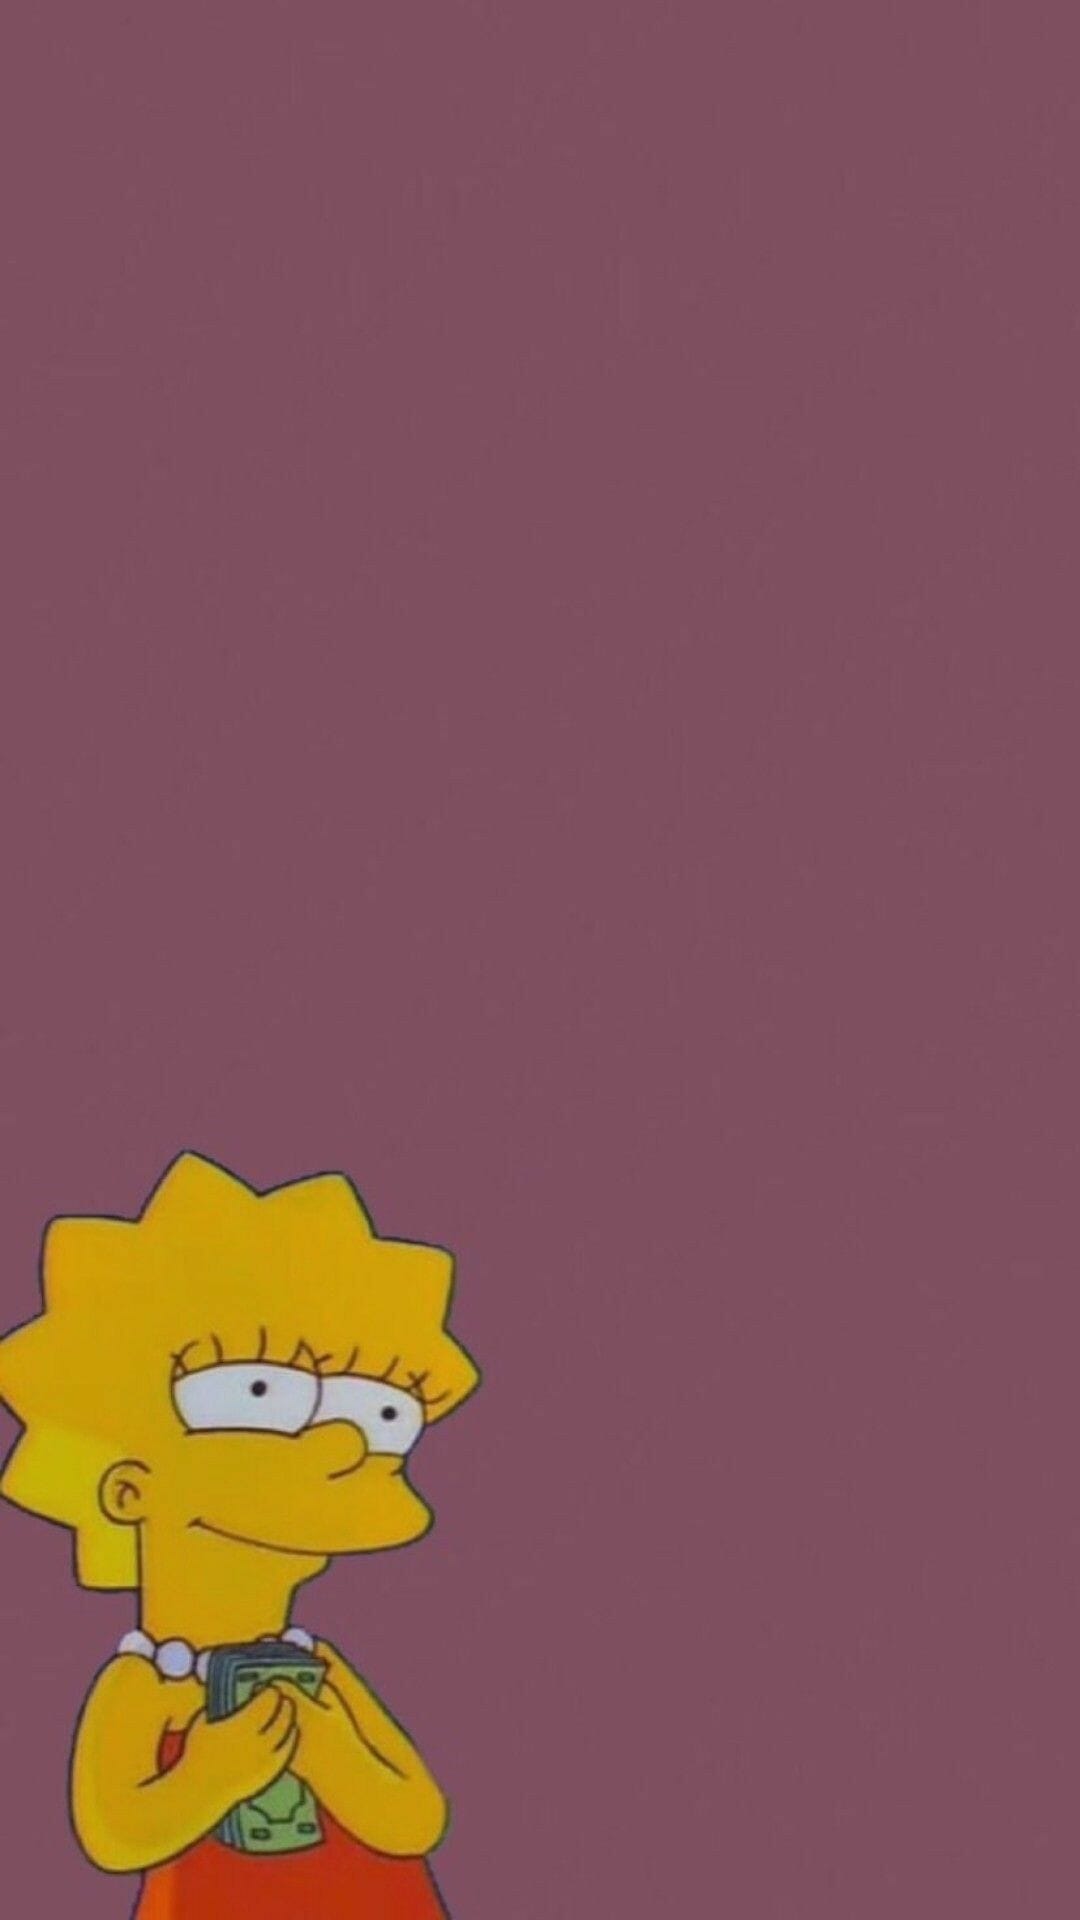 The simpsons wallpaper 1920x - Funny